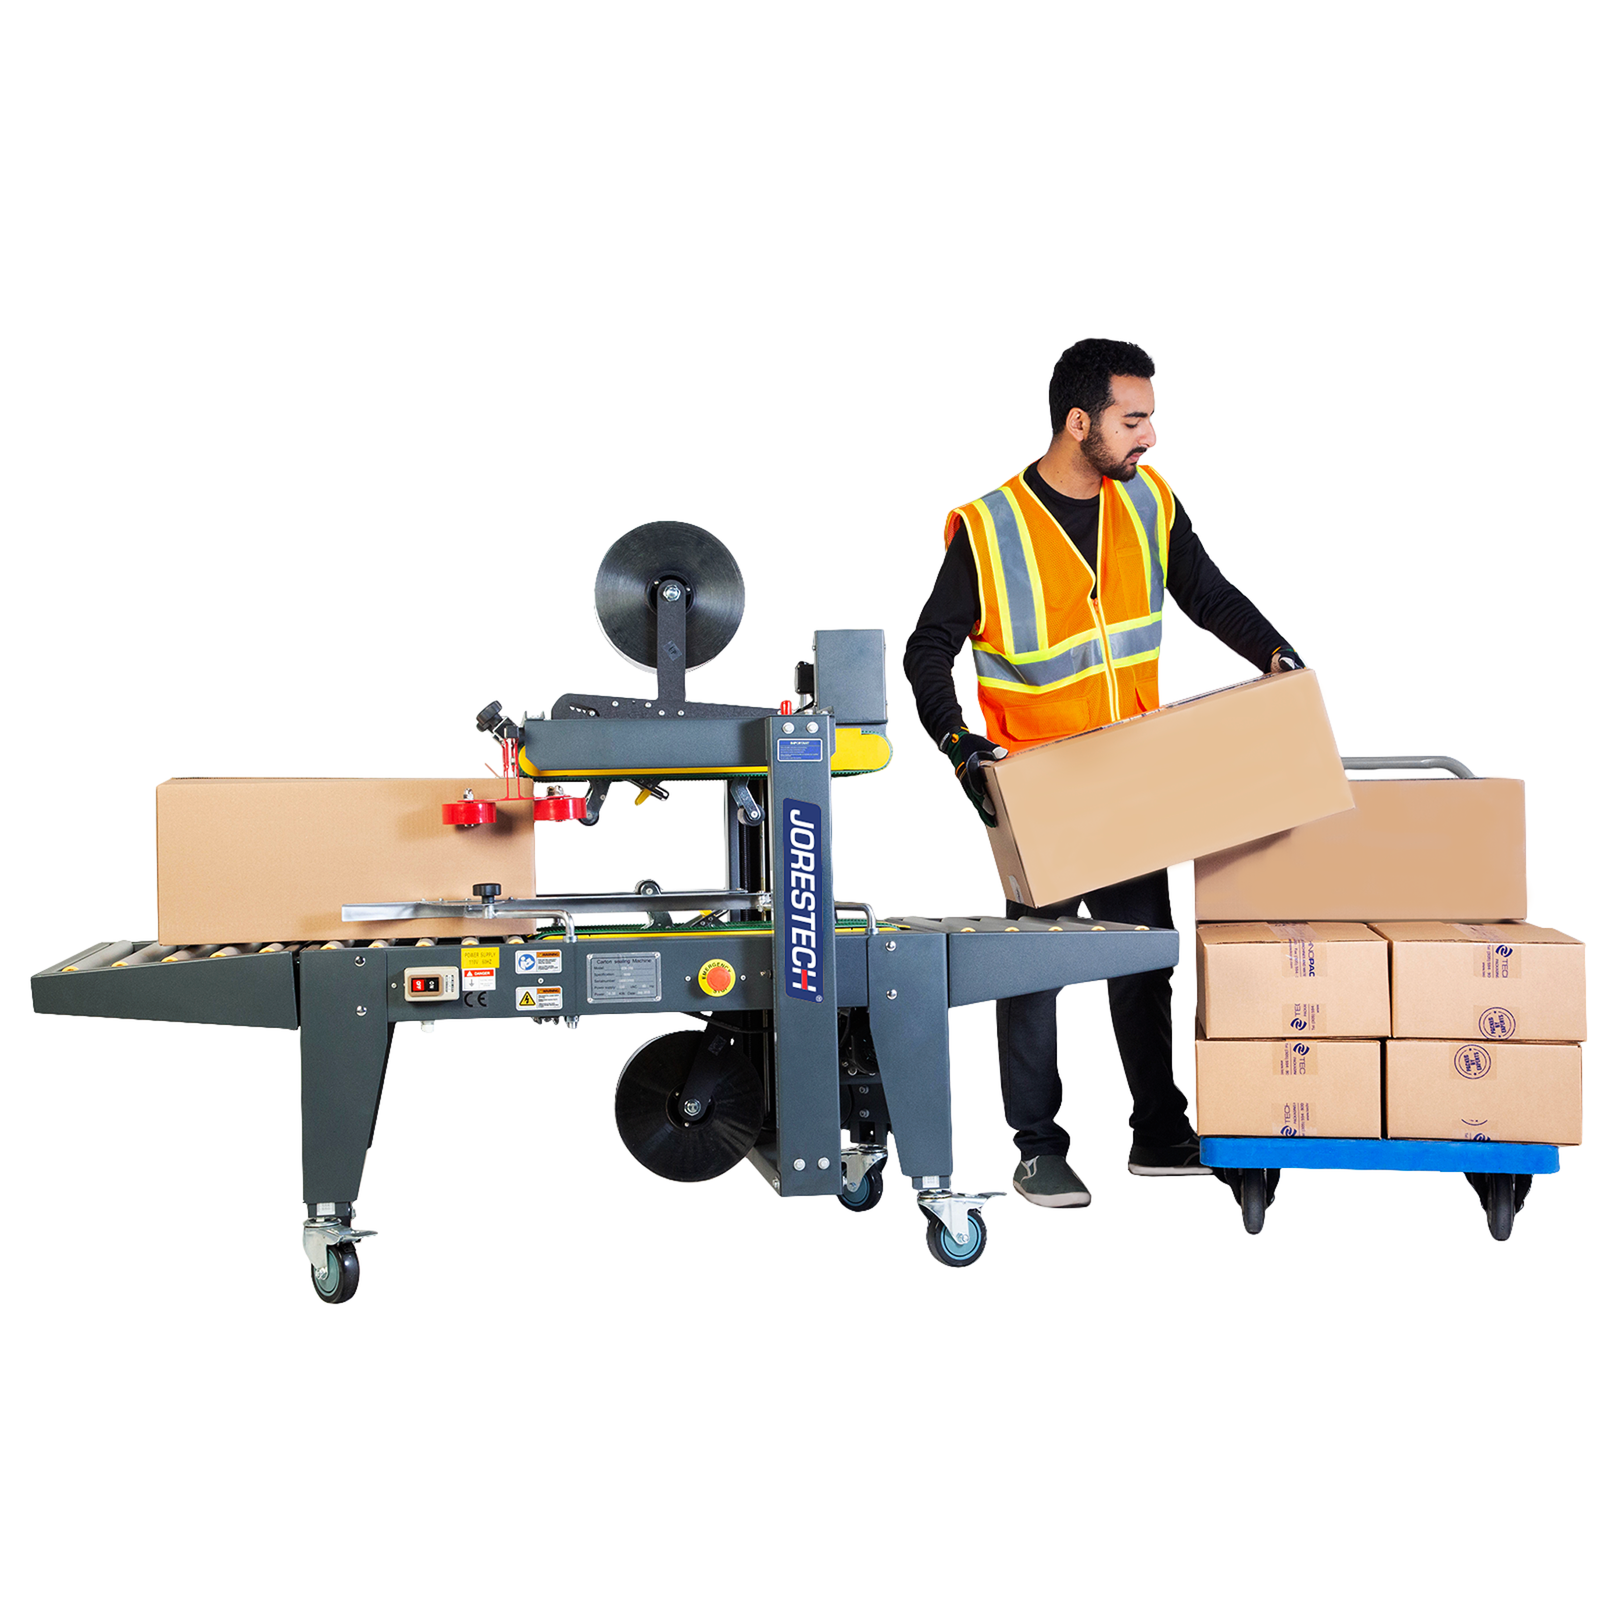 young man wearing orange safety vest and black long sleeve moving box sealed by grey case sealer, on to cart with other boxes